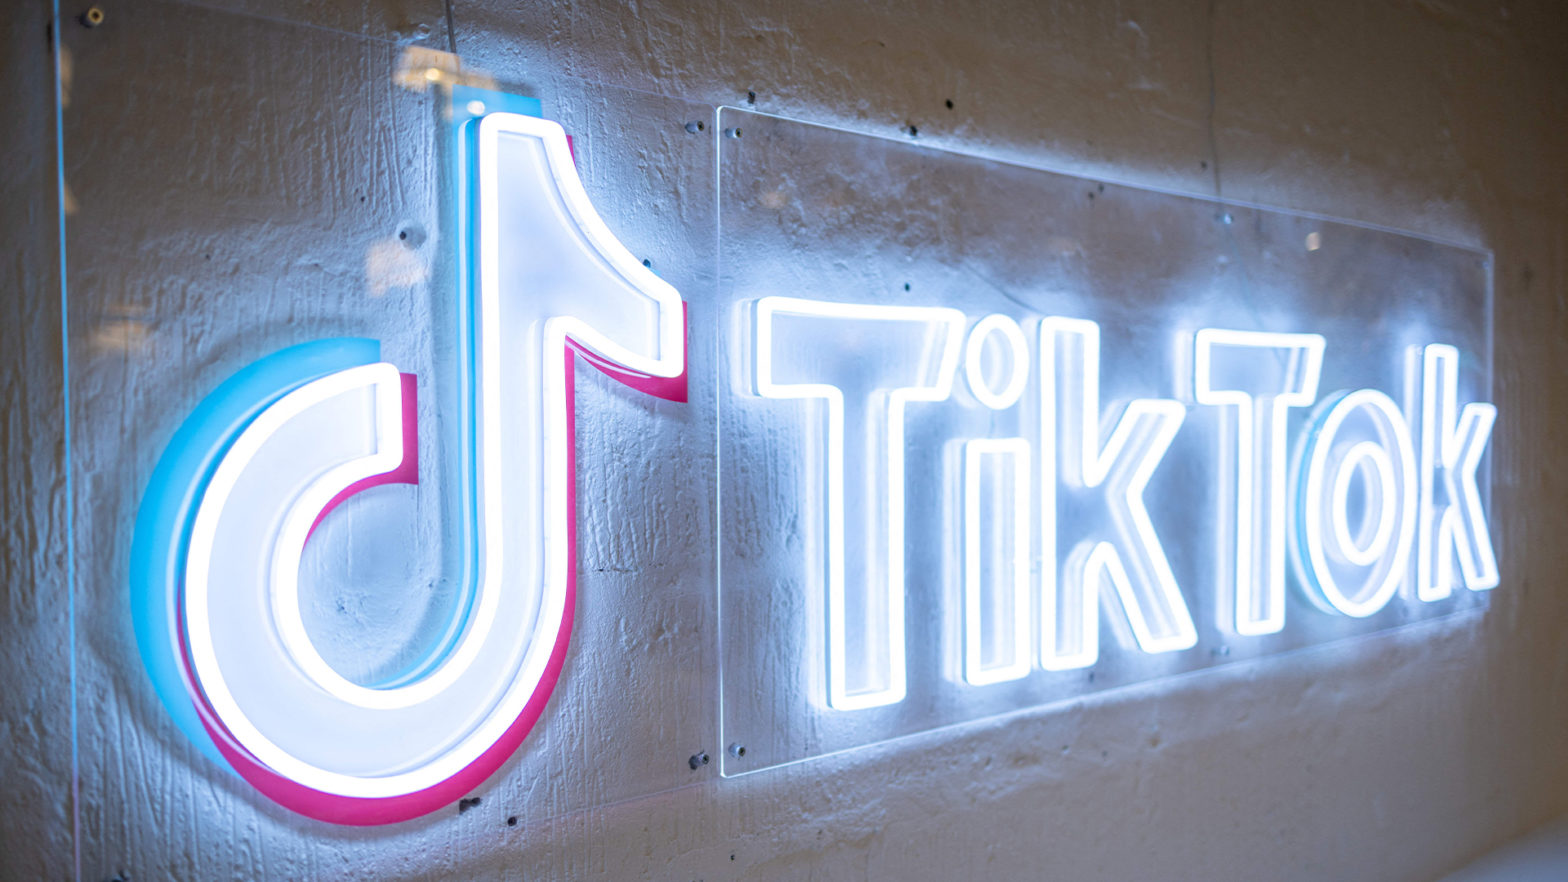 2 Former TikTok Employees Allege They Were Terminated As Retaliation For Speaking Up About The Company's Toxic Racism